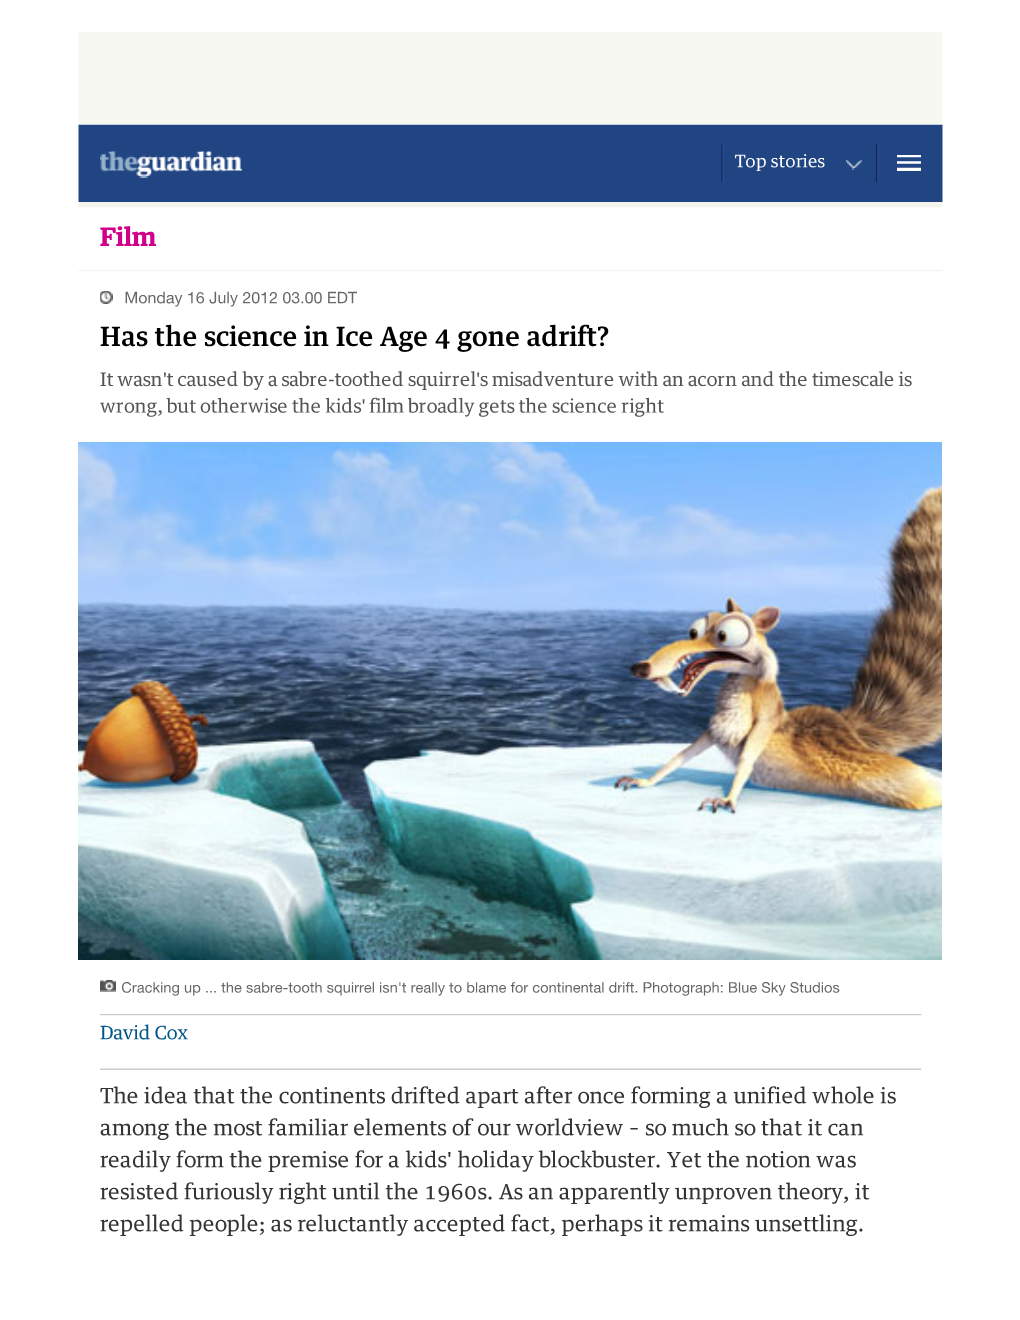 Has the Science in Ice Age 4 Gone Adrift?